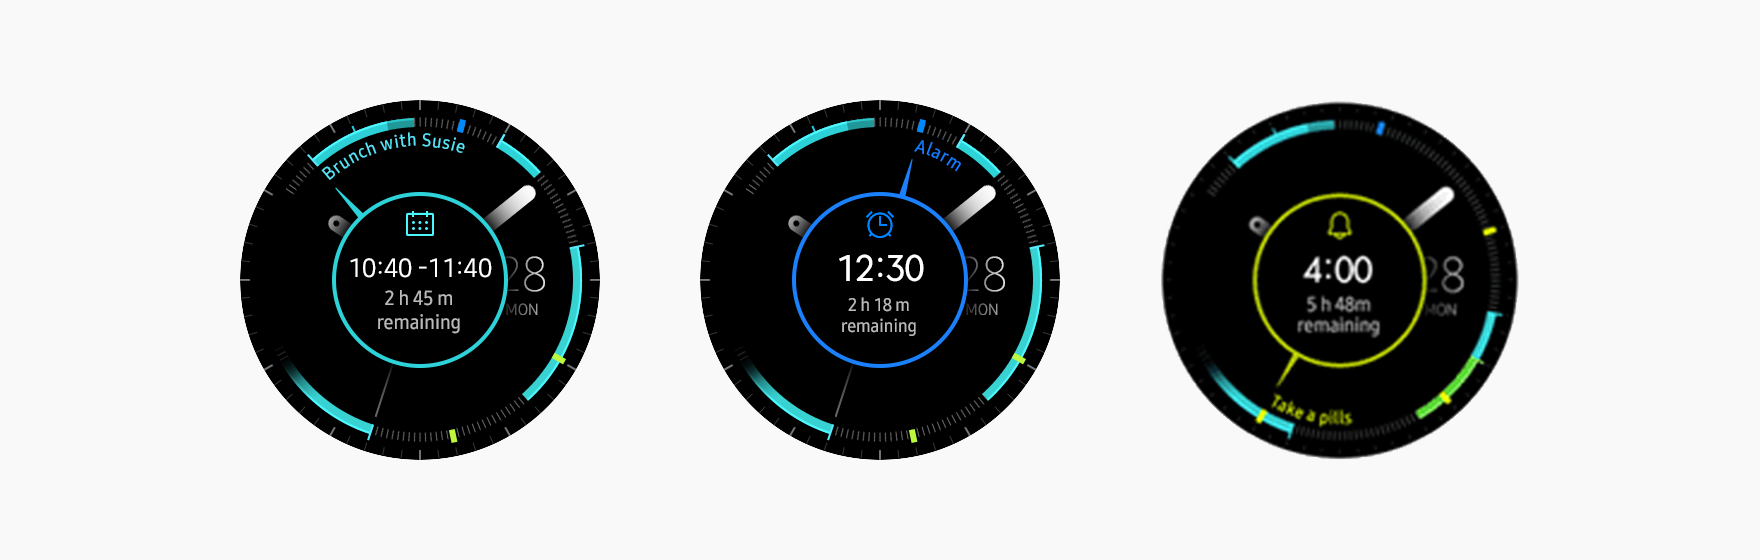 The My Day watch face allows users to check upcoming Calendar, Reminder, and Alarm events using the bezel.